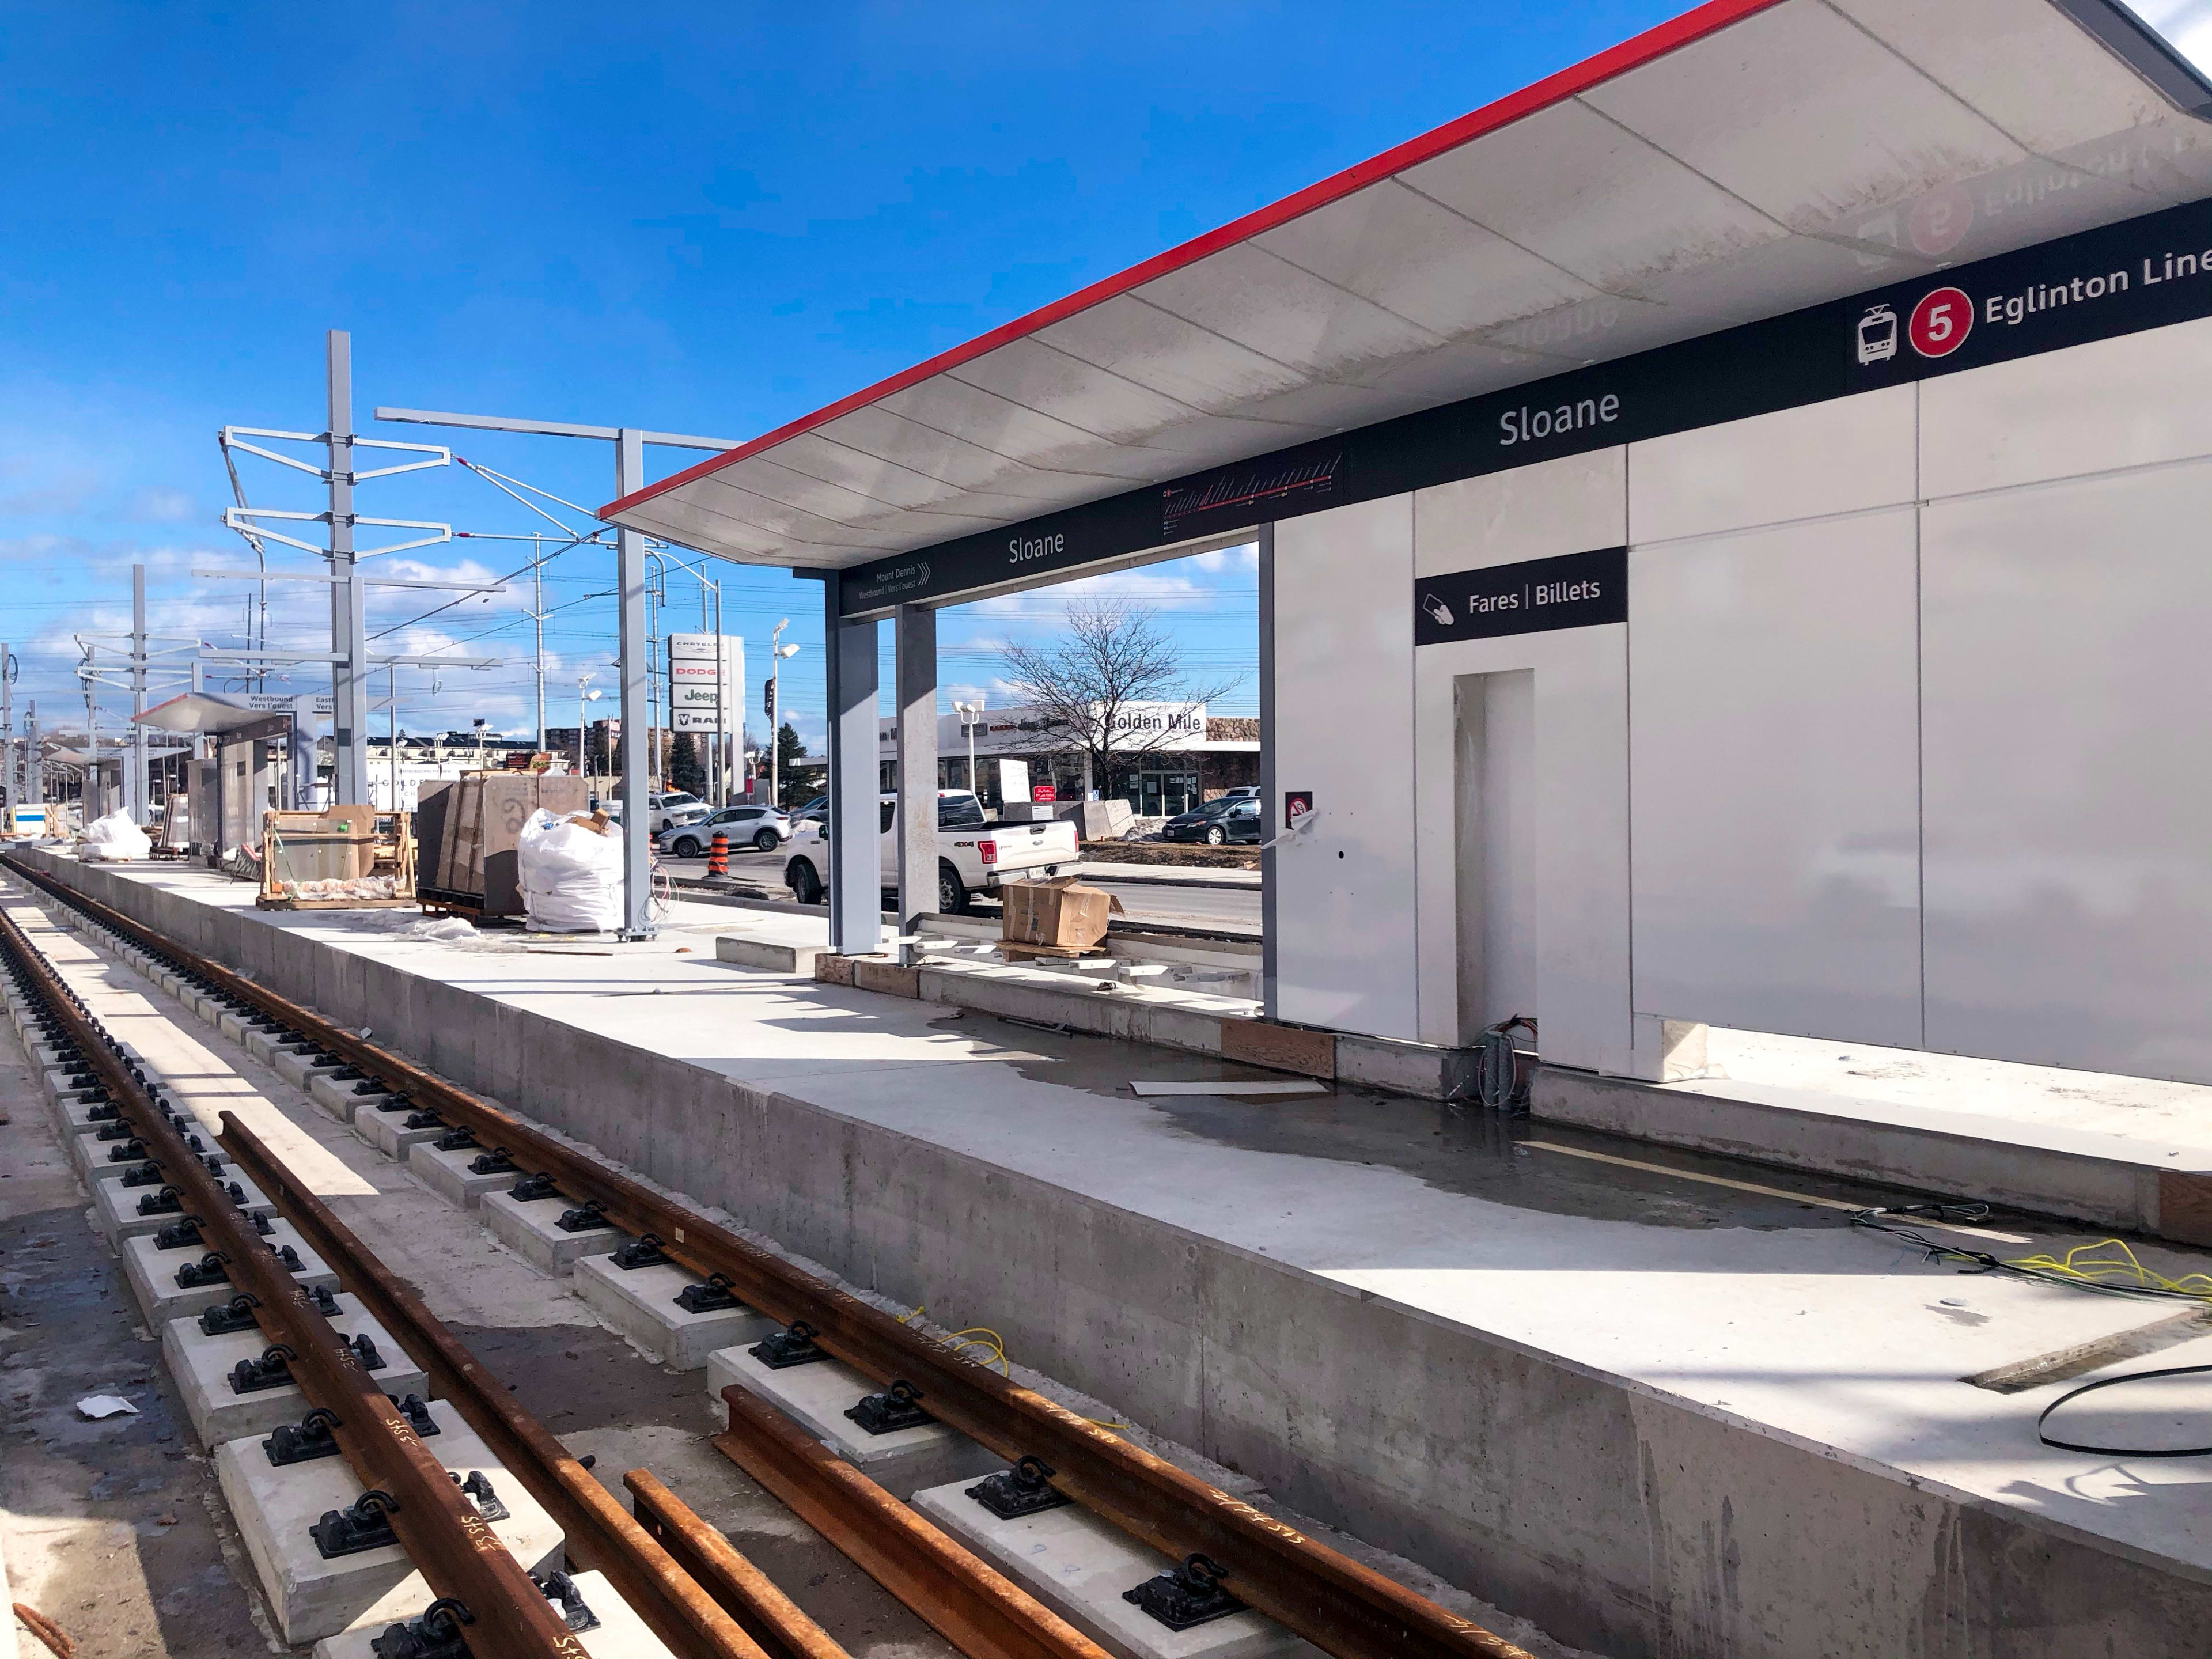 The newly installed structures at the Sloane stop are now waiting on their finishing touches